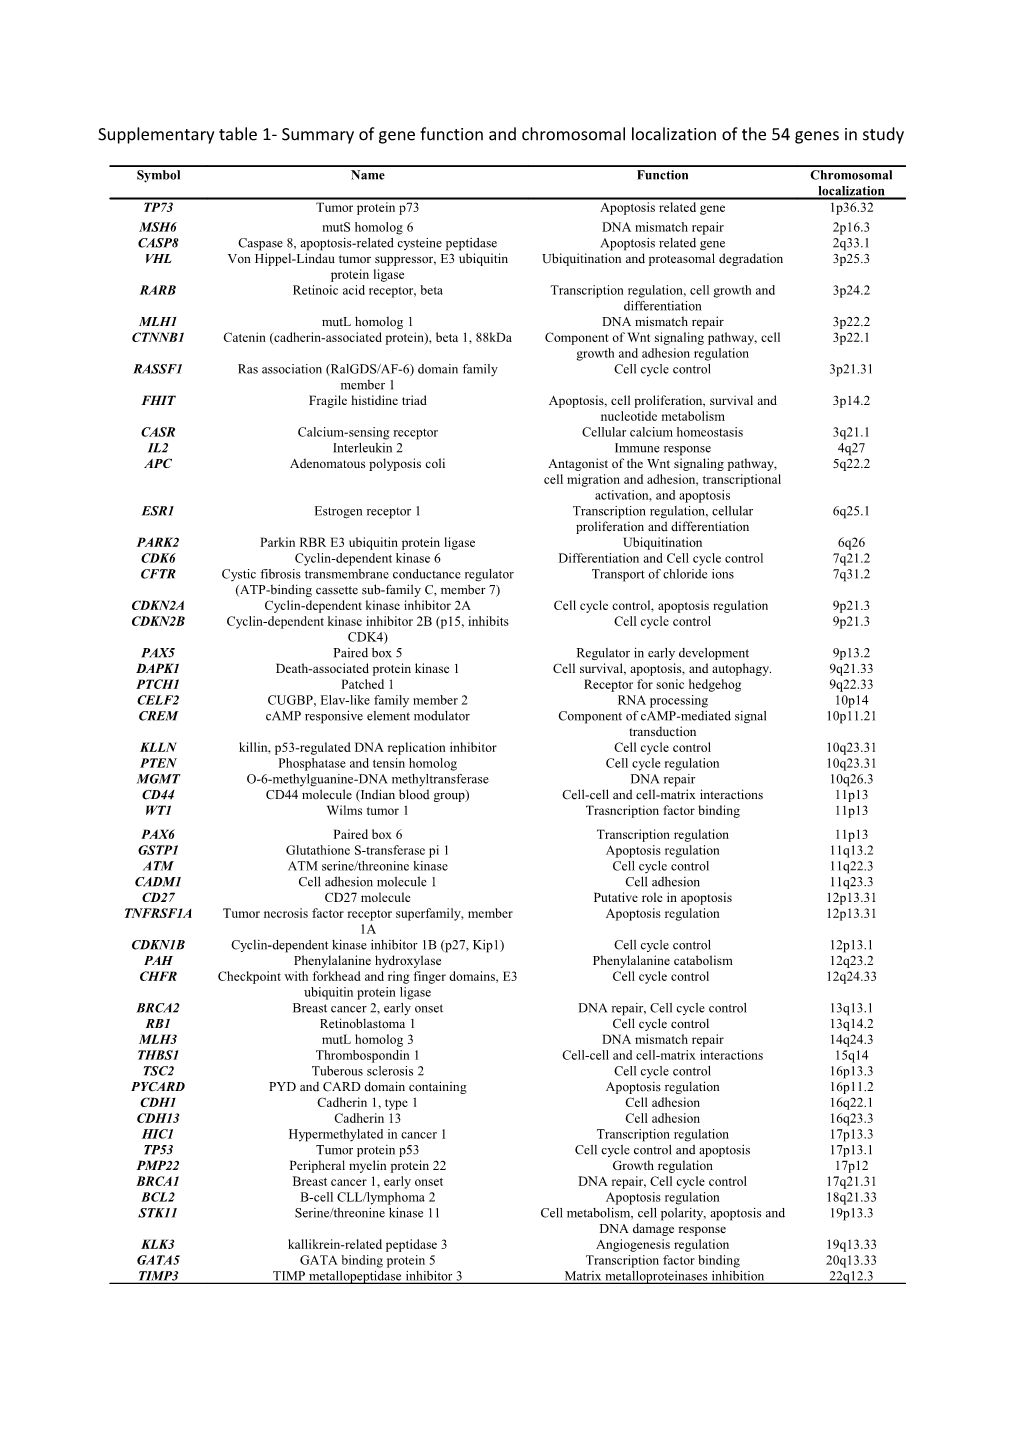 Supplementary Table 1- Summary of Gene Function and Chromosomal Localization of the 54